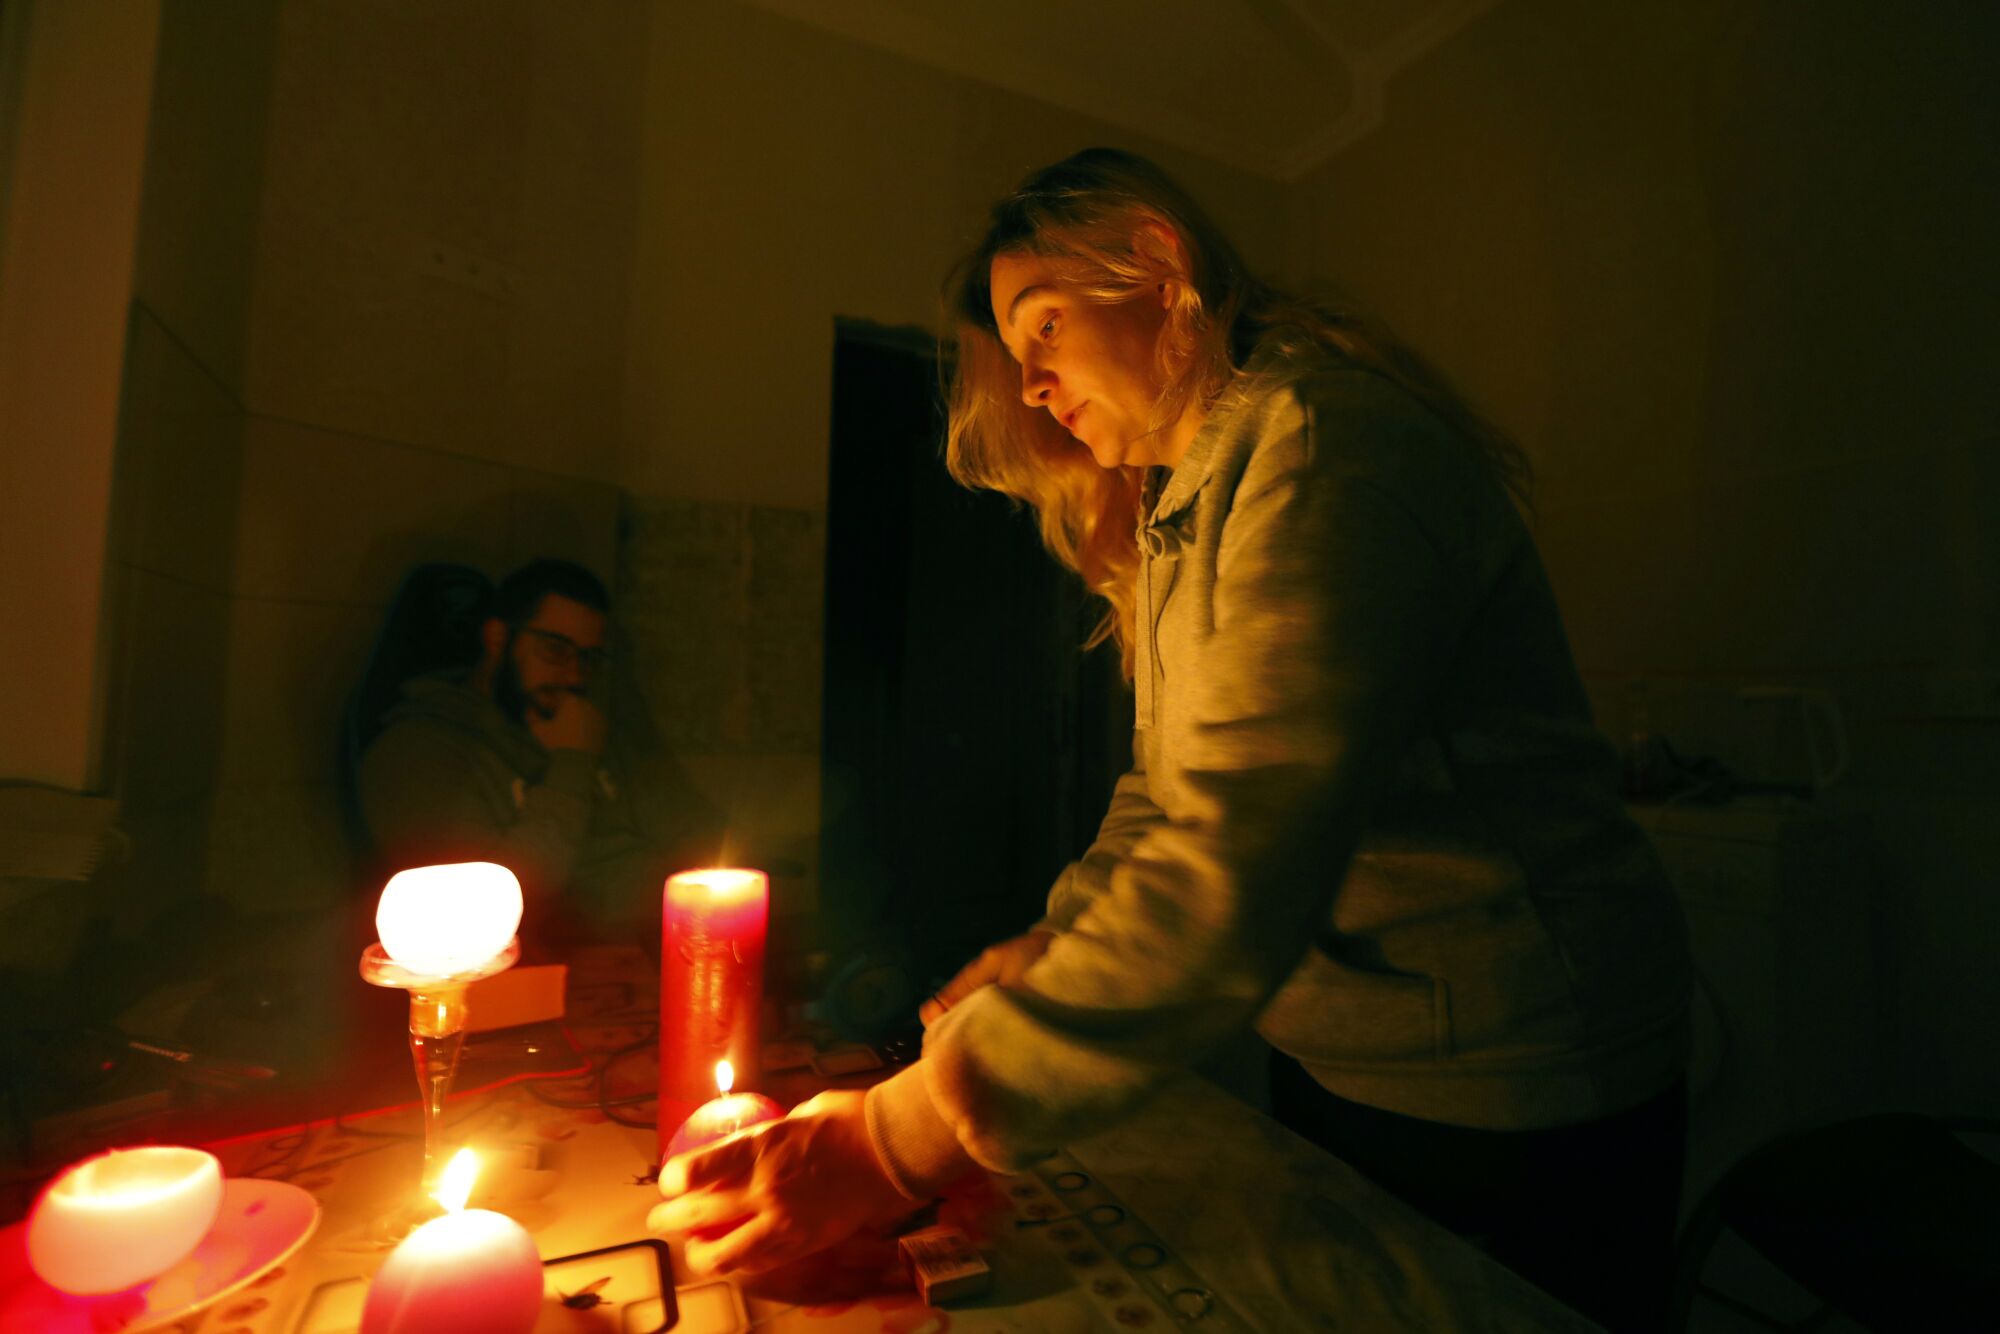 A woman on the right holds one of the lit candles on a table while a man looks on in the background 